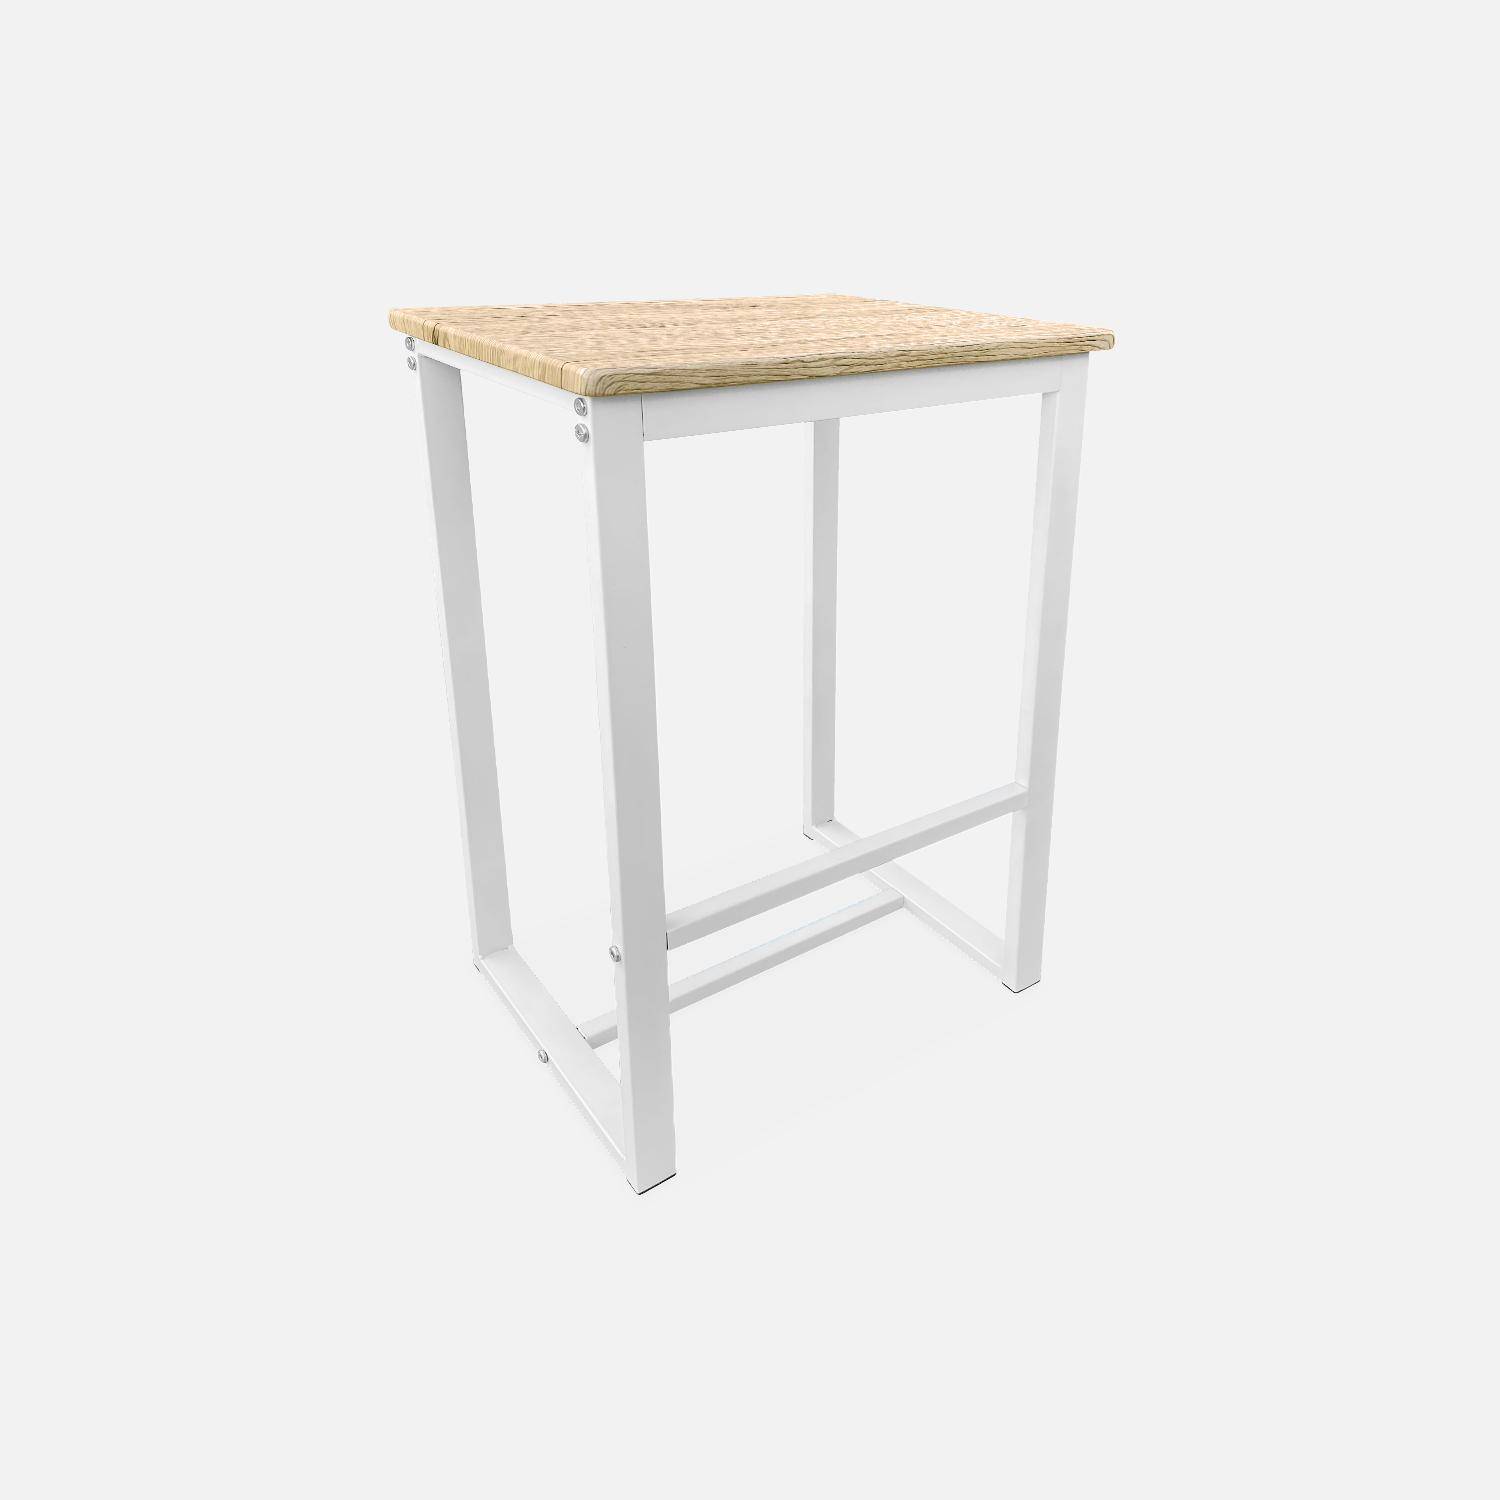 Industrial bar style table set with 2 stools, 60x60x88cm - Loft - white Photo5